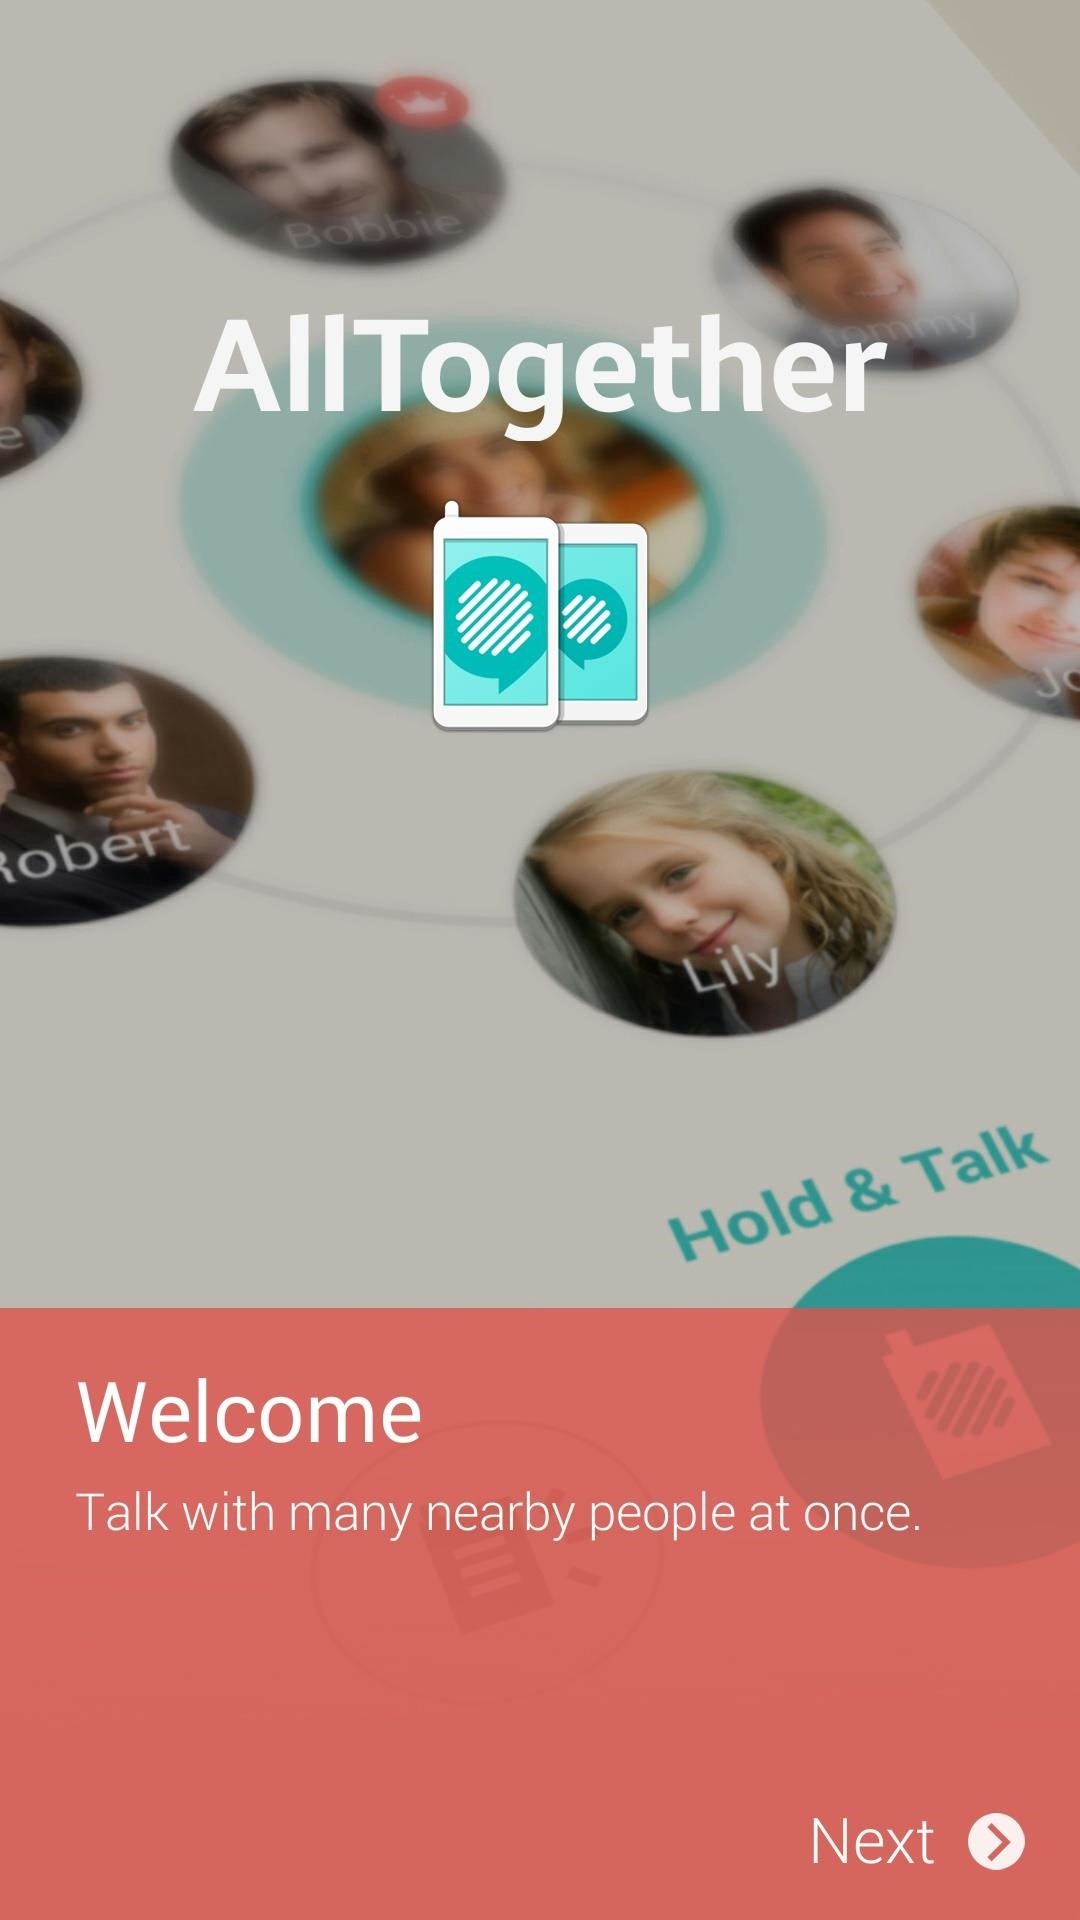 Galaxy Note 4's Exclusive Apps Now Available for Any Galaxy Device